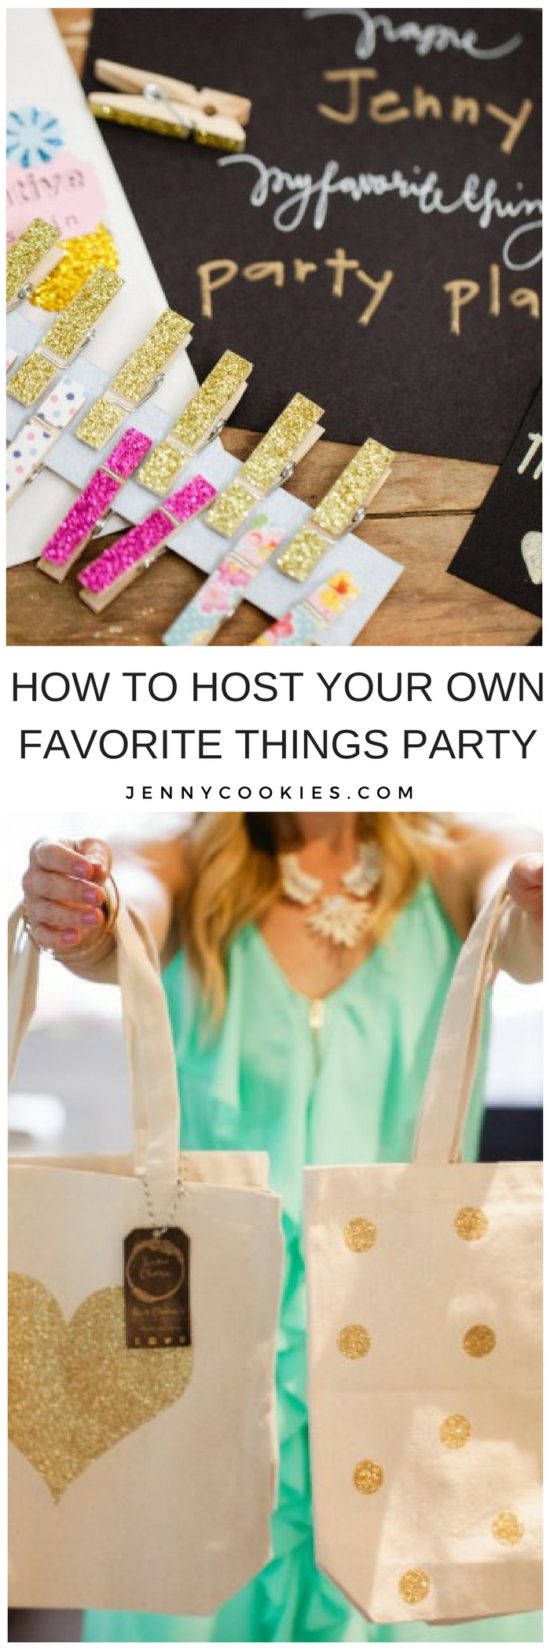 https://jennycookies.com/wp-content/uploads/2014/05/fav-things-party-550x1650.jpg